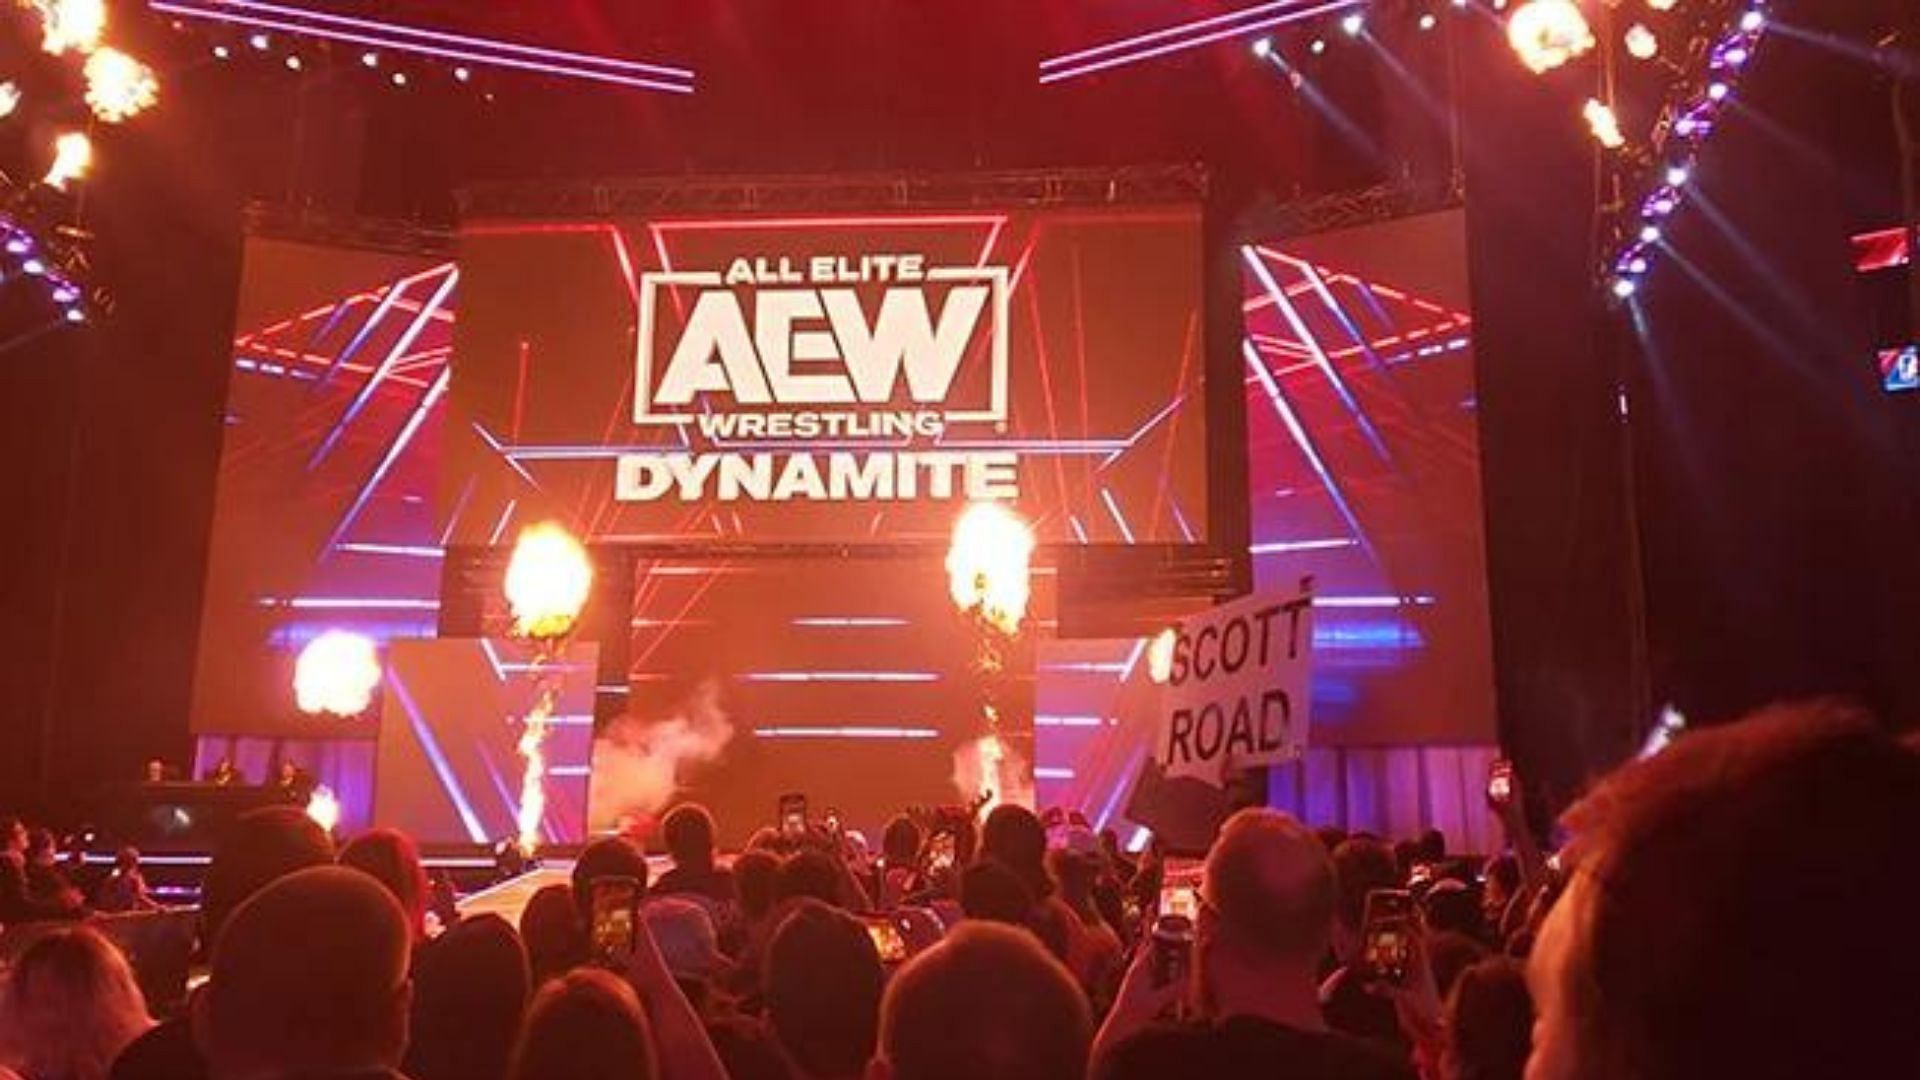 Which AEW personality would be divorced if they joined WWE?